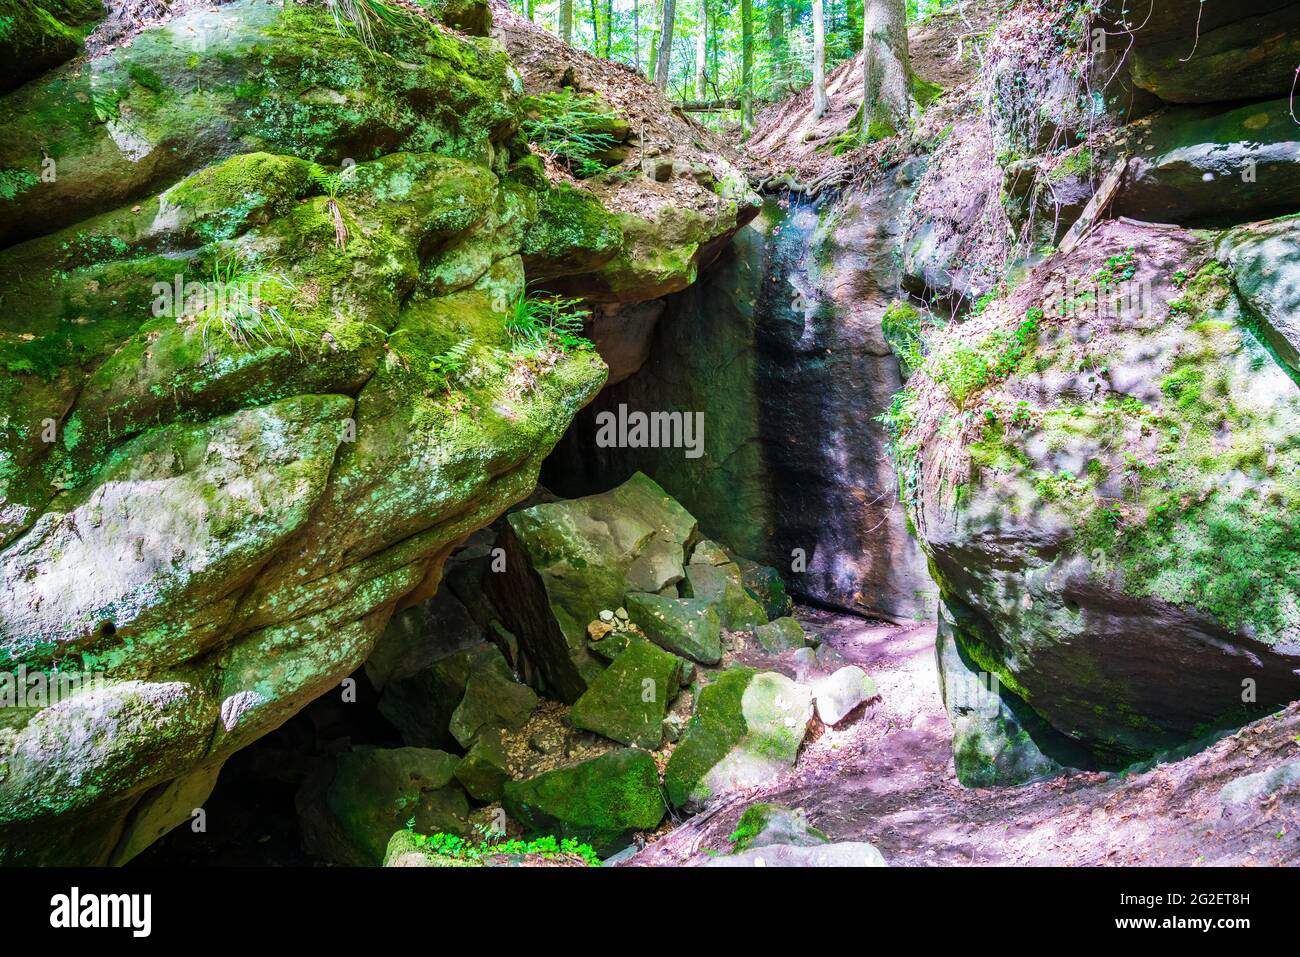 Germany, Gallengrotte cave in green forest landscape of kaisersbach ner welzheim with sunlight shining through the trees on the moss covered rocks Stock Photo